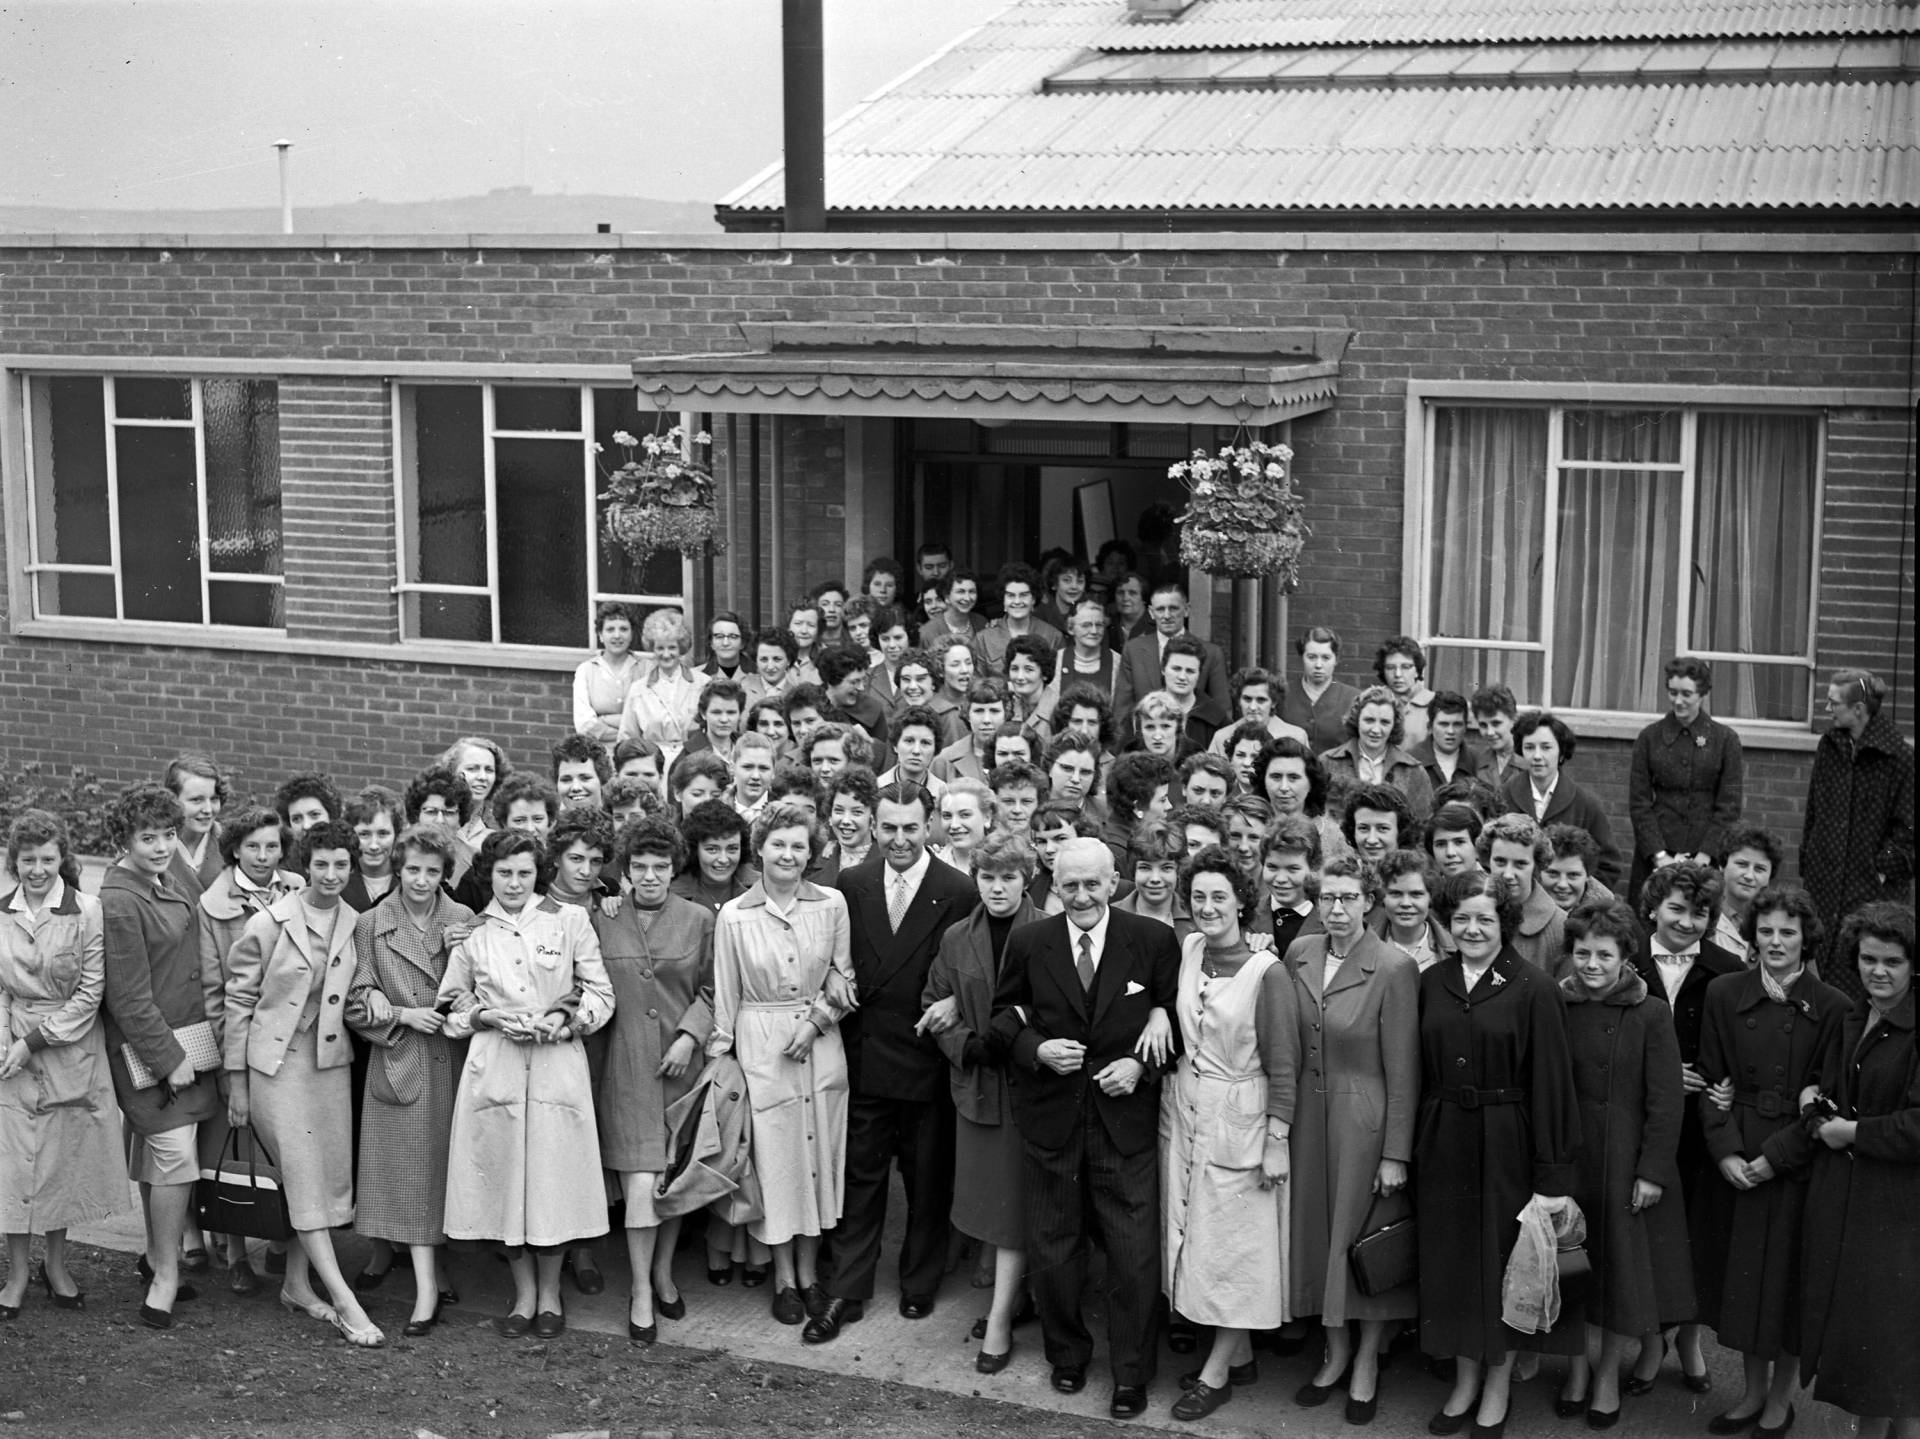 15.-1959-June-18th-opening-of-Glove-Factory-stanley.